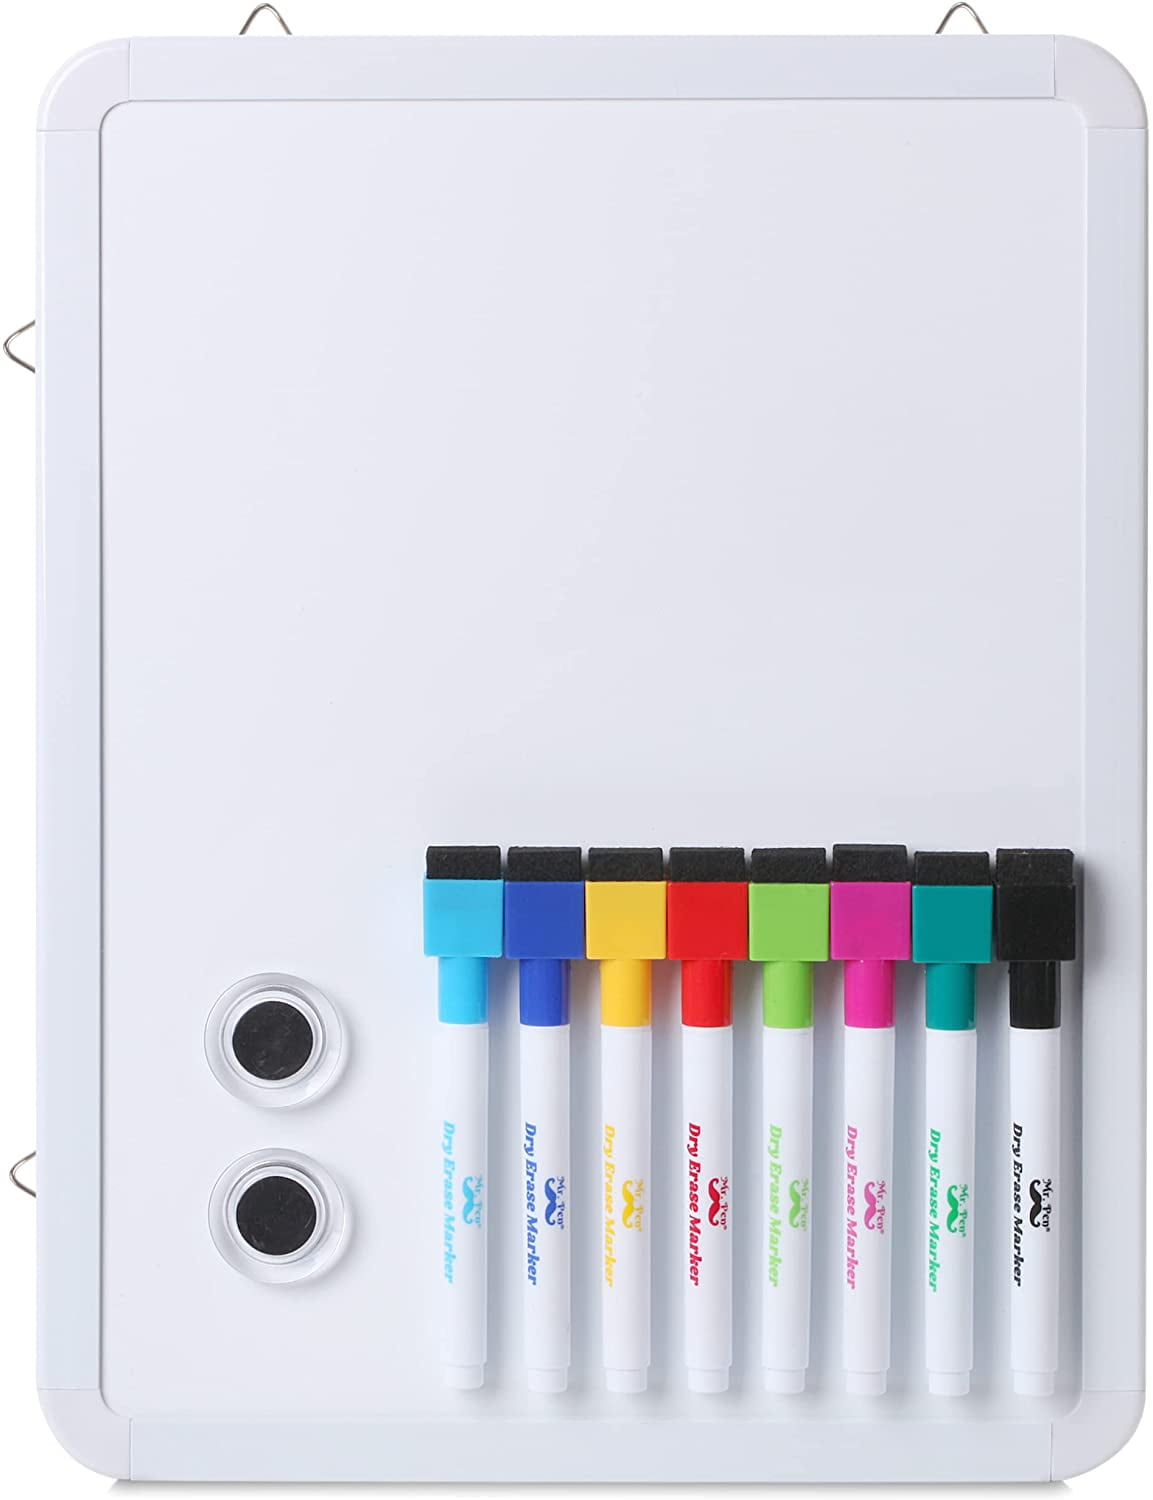 RETON 30 Pcs Dry Erase Markers, 4 Inch Mini Whiteboard Pens, White Board  Markers with Fine Tip for Classroom, Office, Hospital, Factory, Board Games